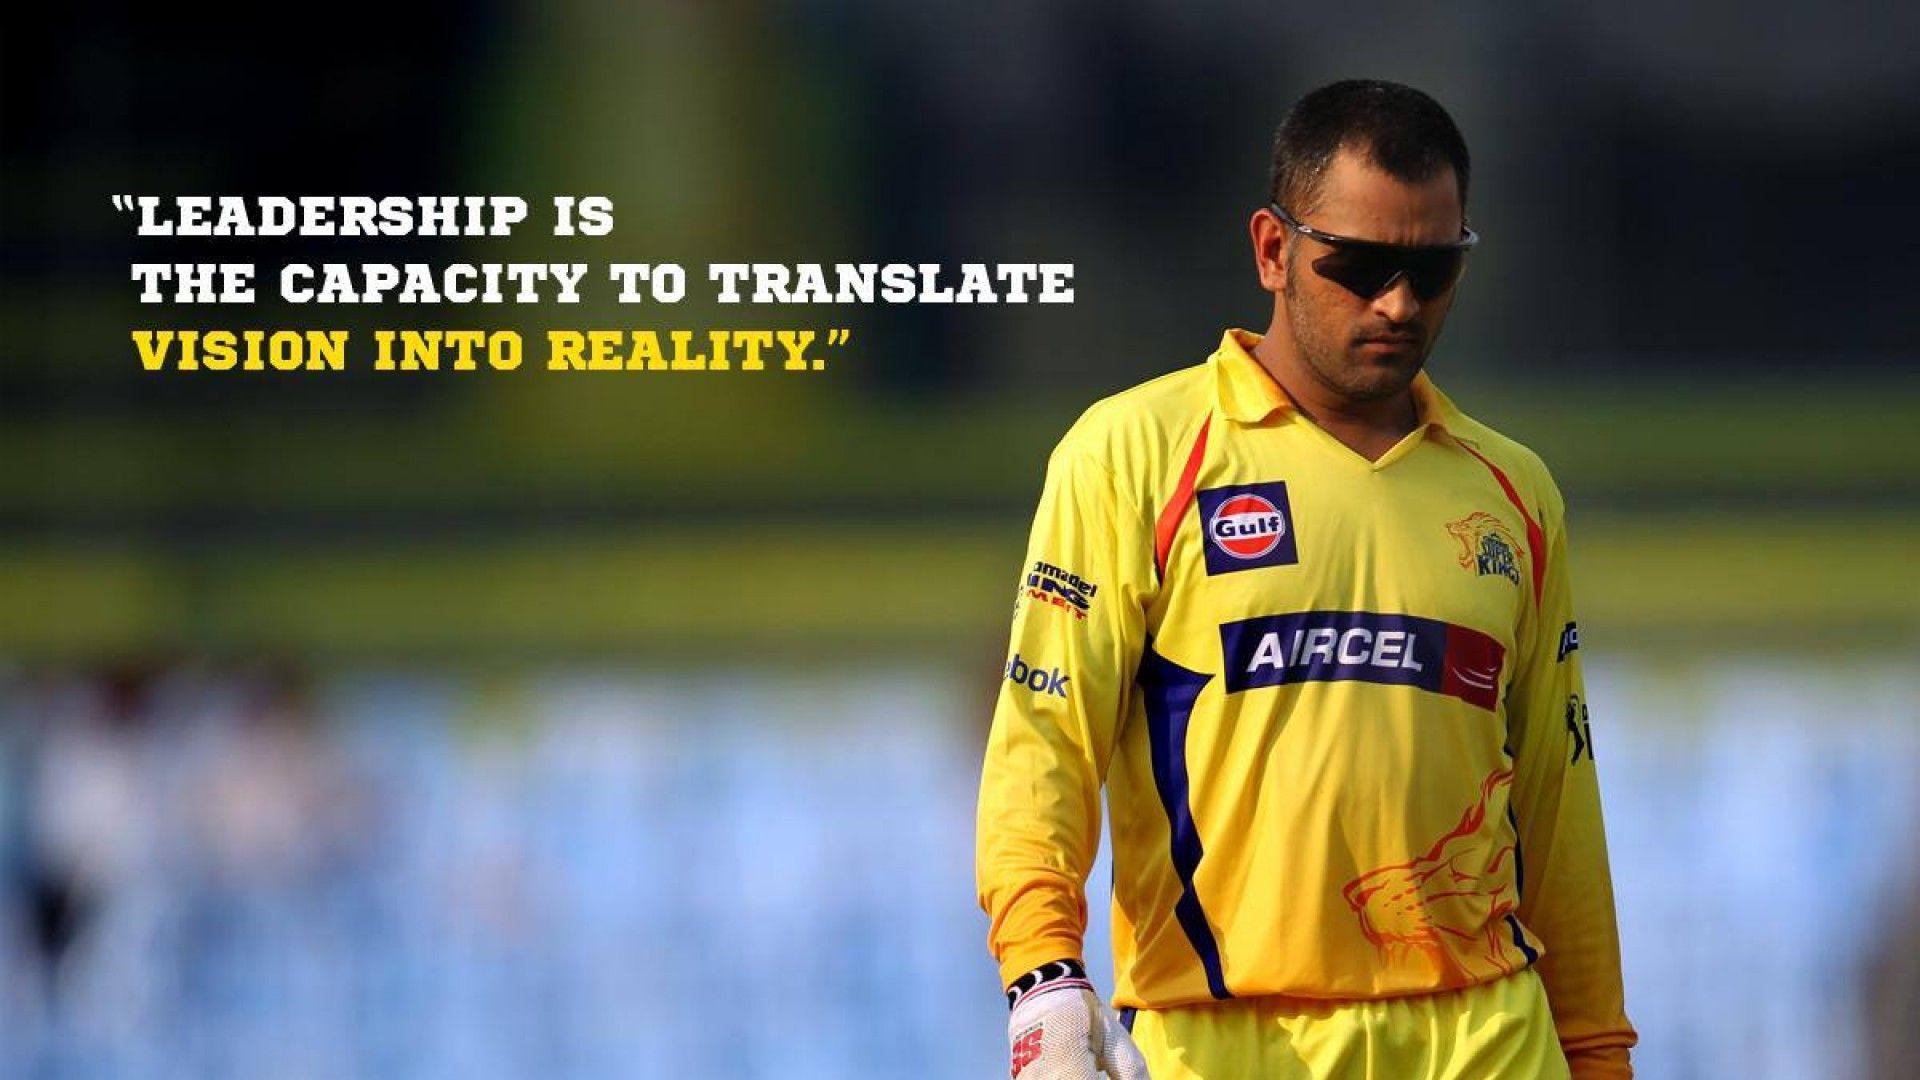 Top Mahendra Singh Dhoni HD Wallpaper Image And Latest Photo. Dhoni quotes, Dhoni wallpaper, 10th quotes